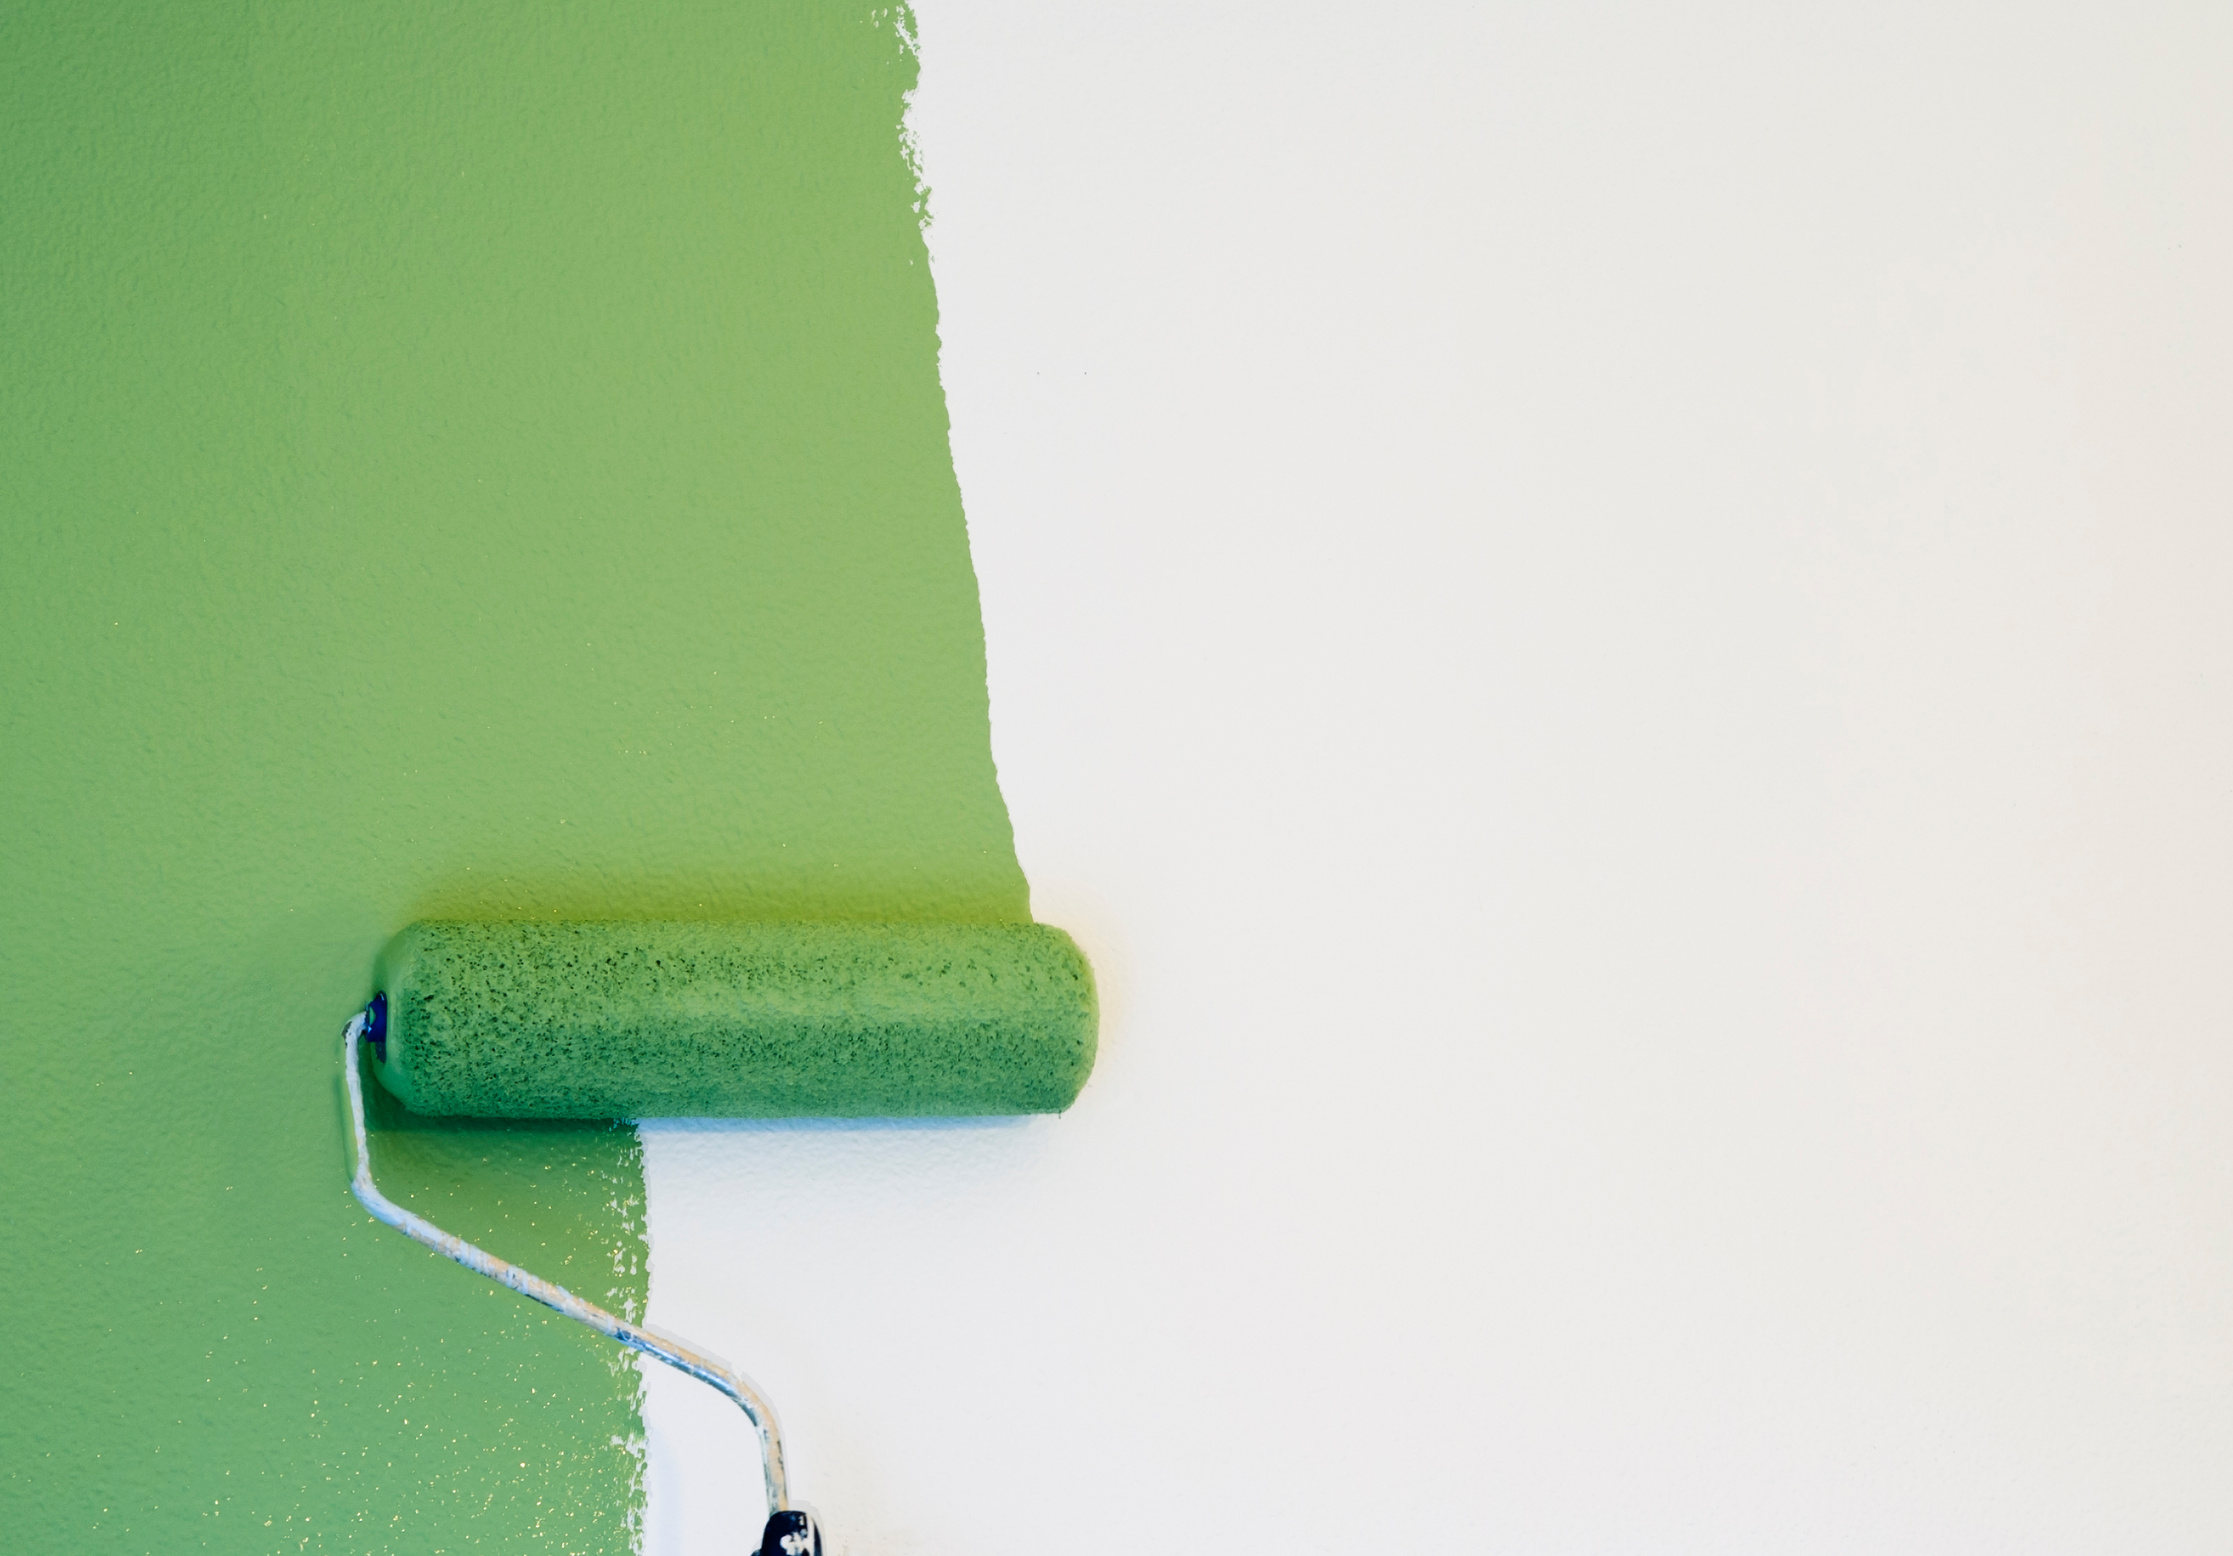 Paint Roller Painting a Wall